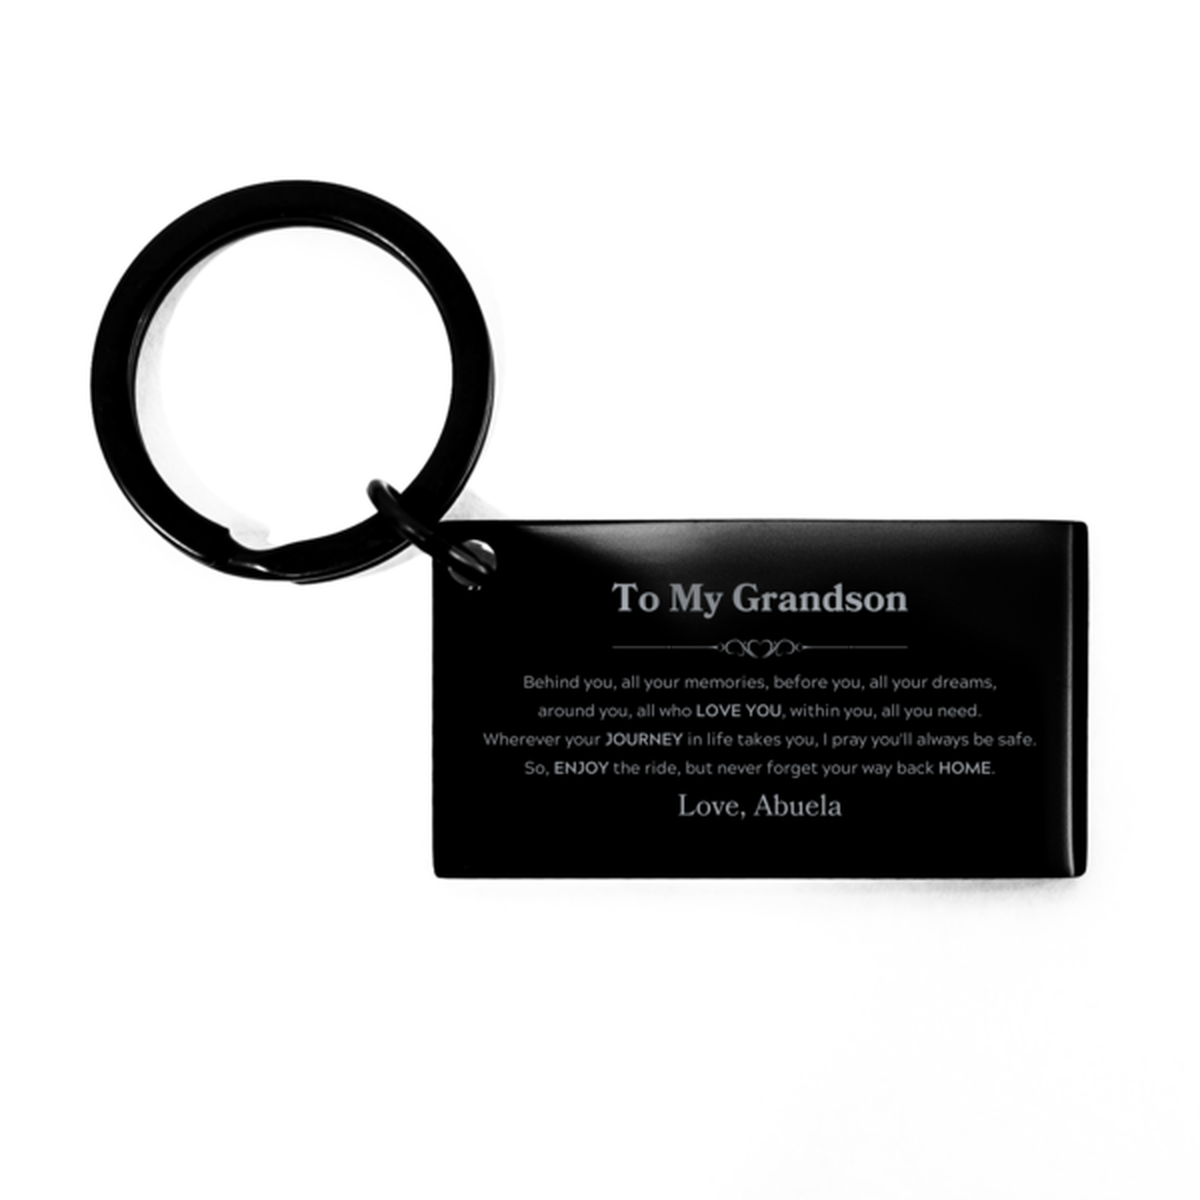 To My Grandson Graduation Gifts from Abuela, Grandson Keychain Christmas Birthday Gifts for Grandson Behind you, all your memories, before you, all your dreams. Love, Abuela